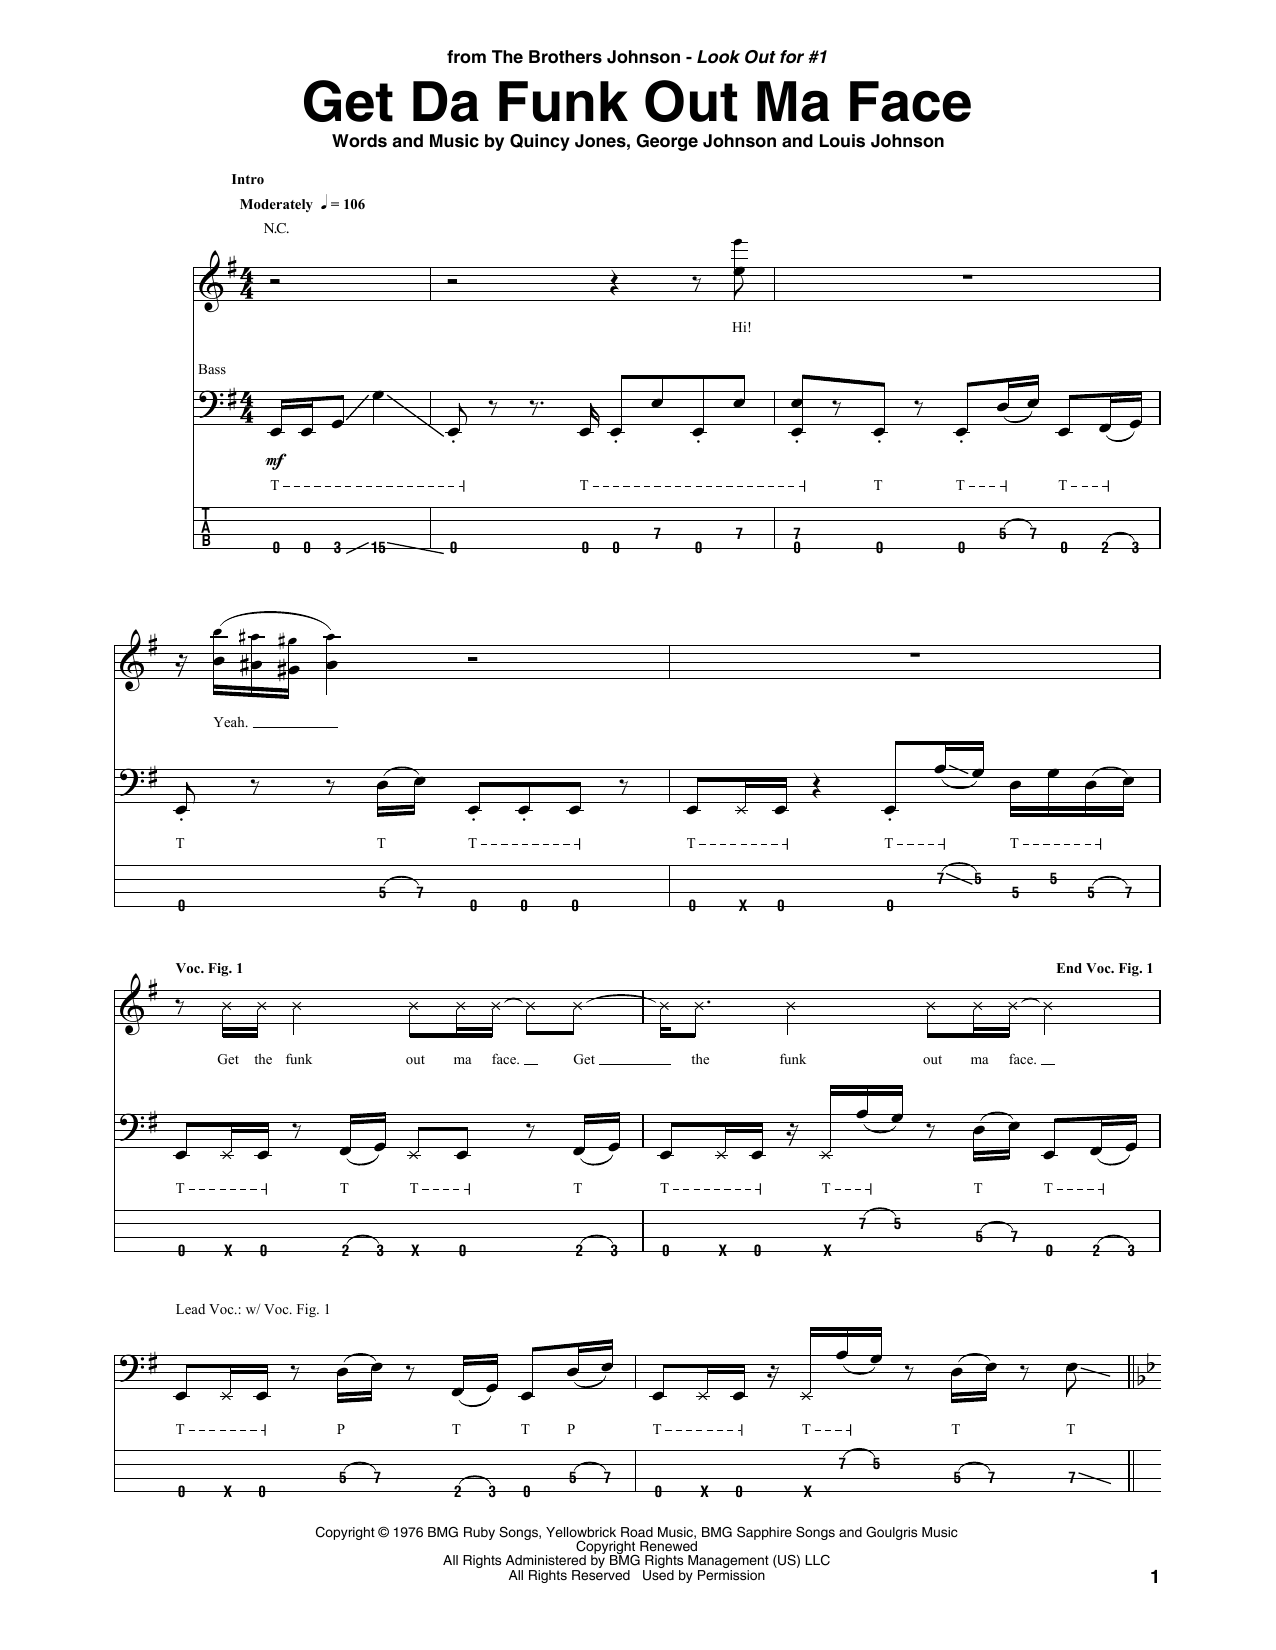 Download The Brothers Johnson Get Da Funk Out Ma Face Sheet Music